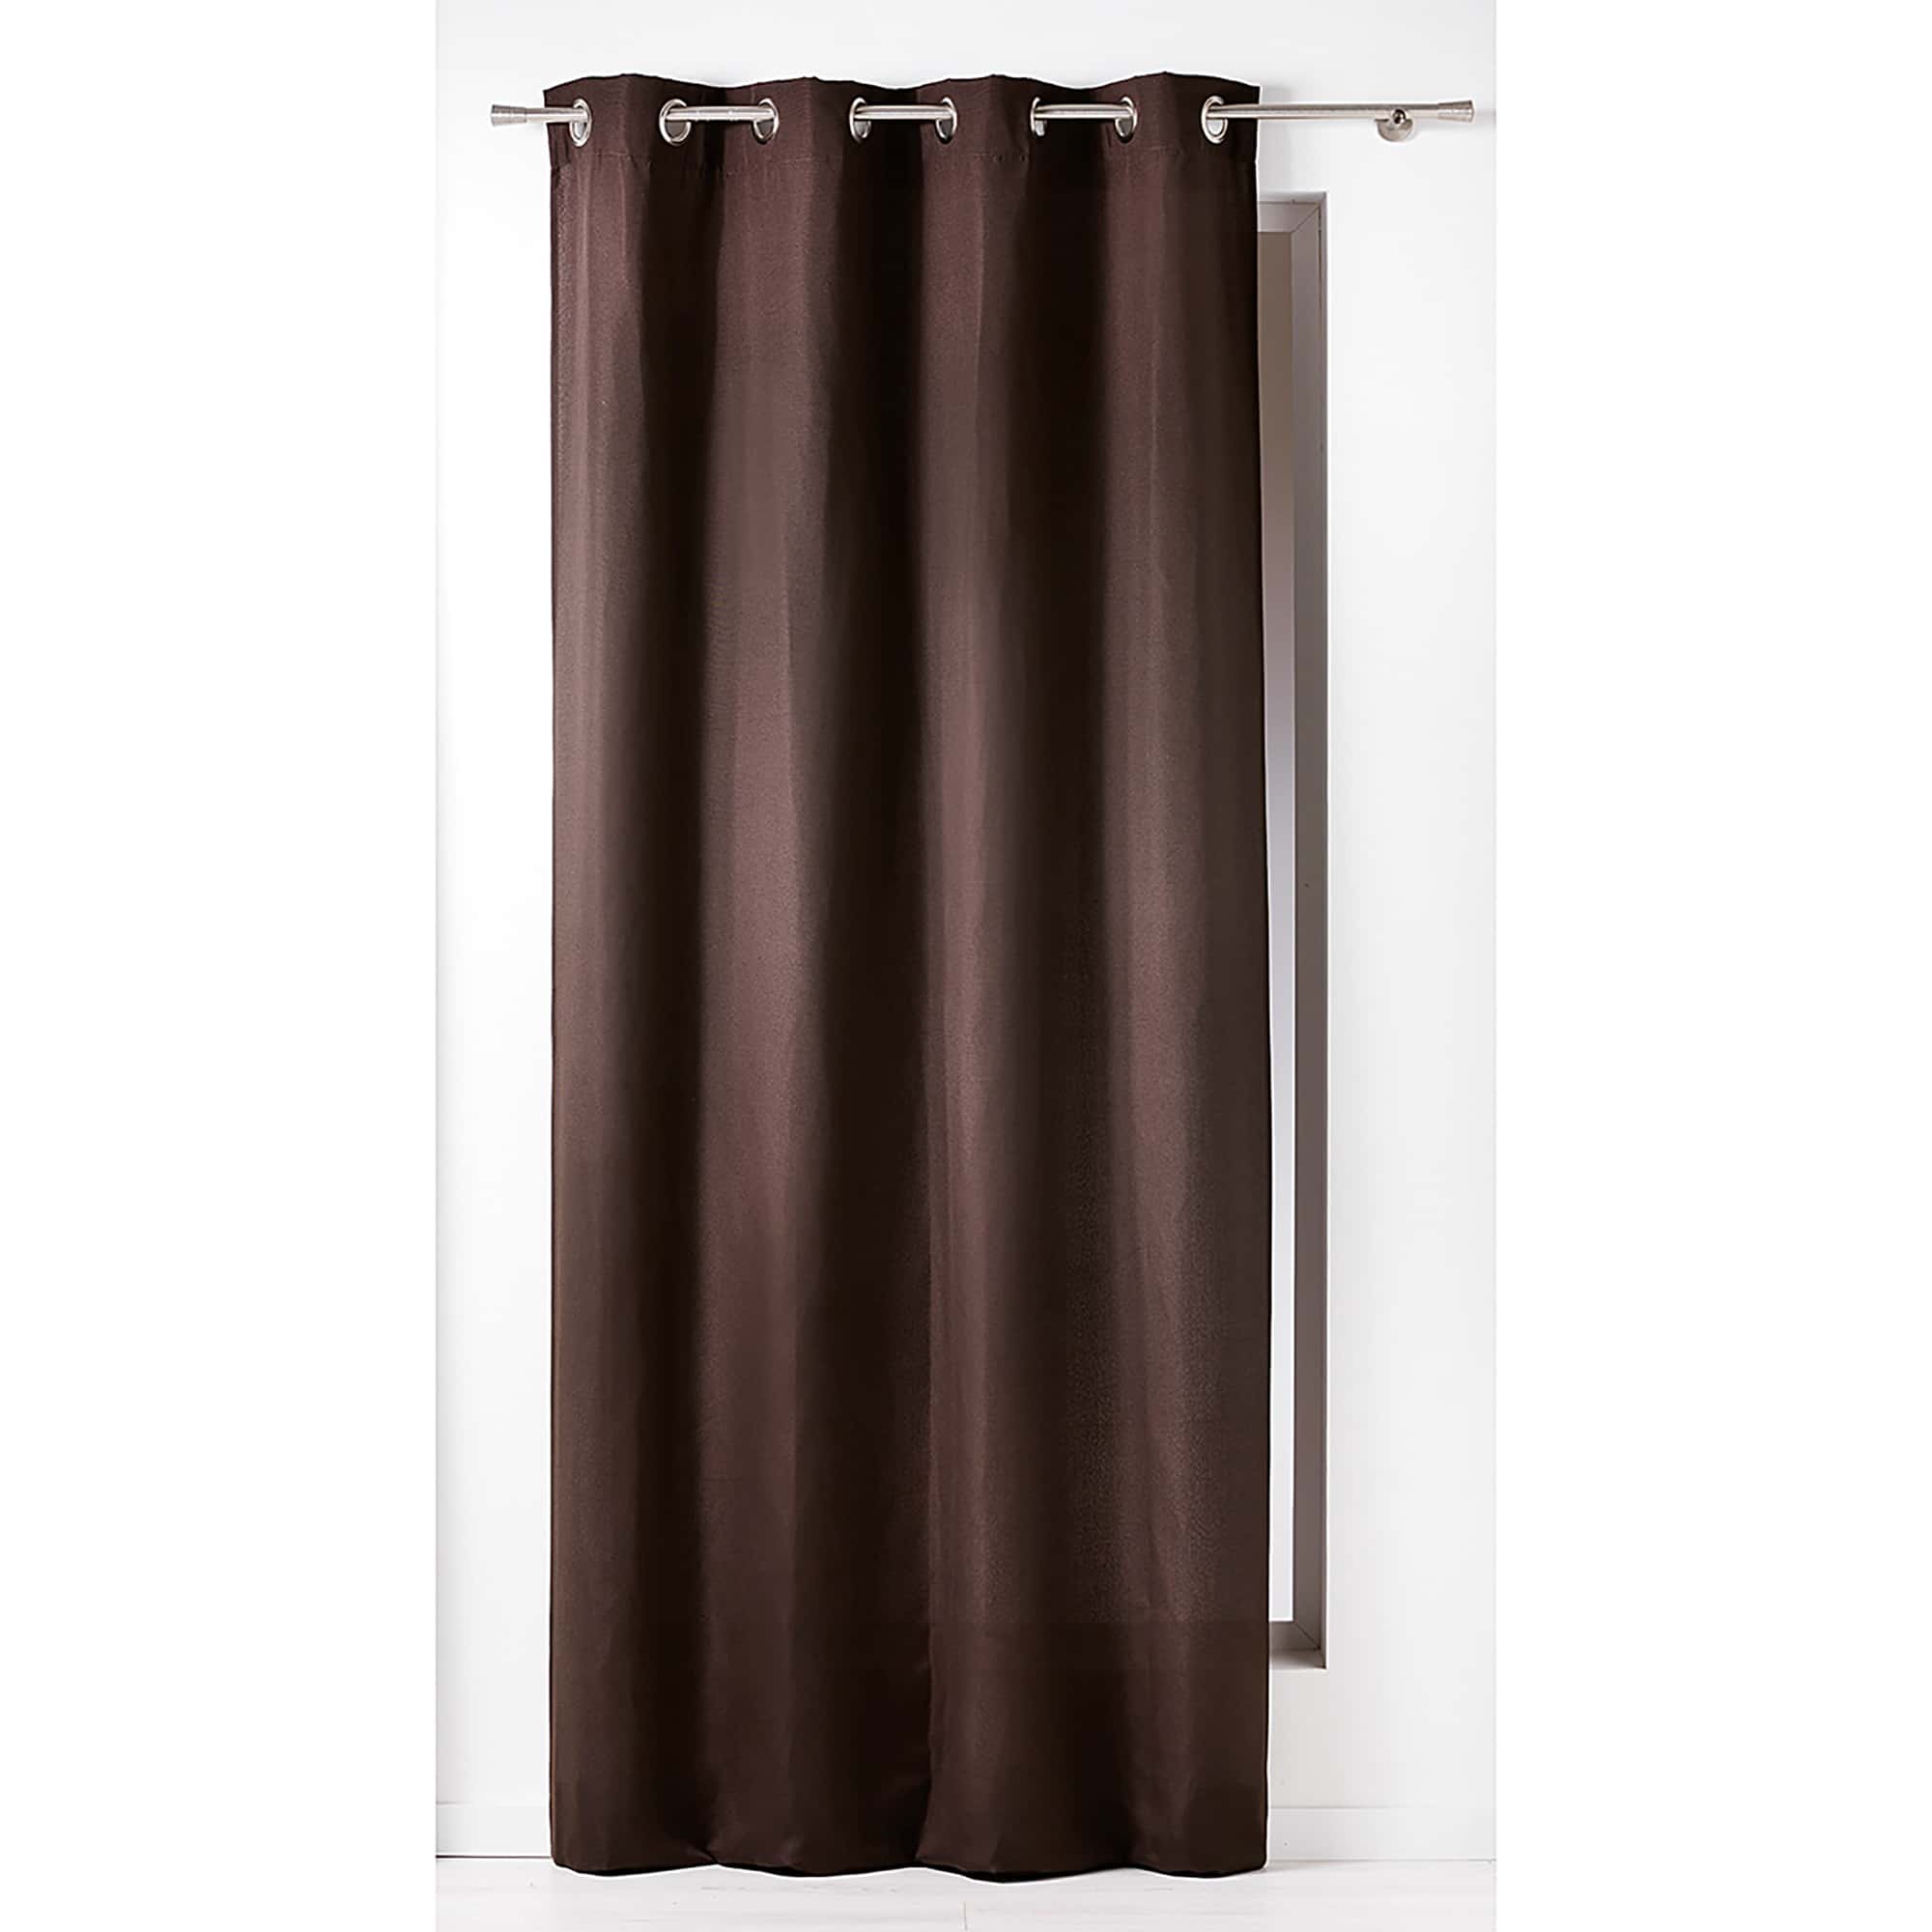 solid chocolate brown 100% cotton window curtain 1 panel for large window